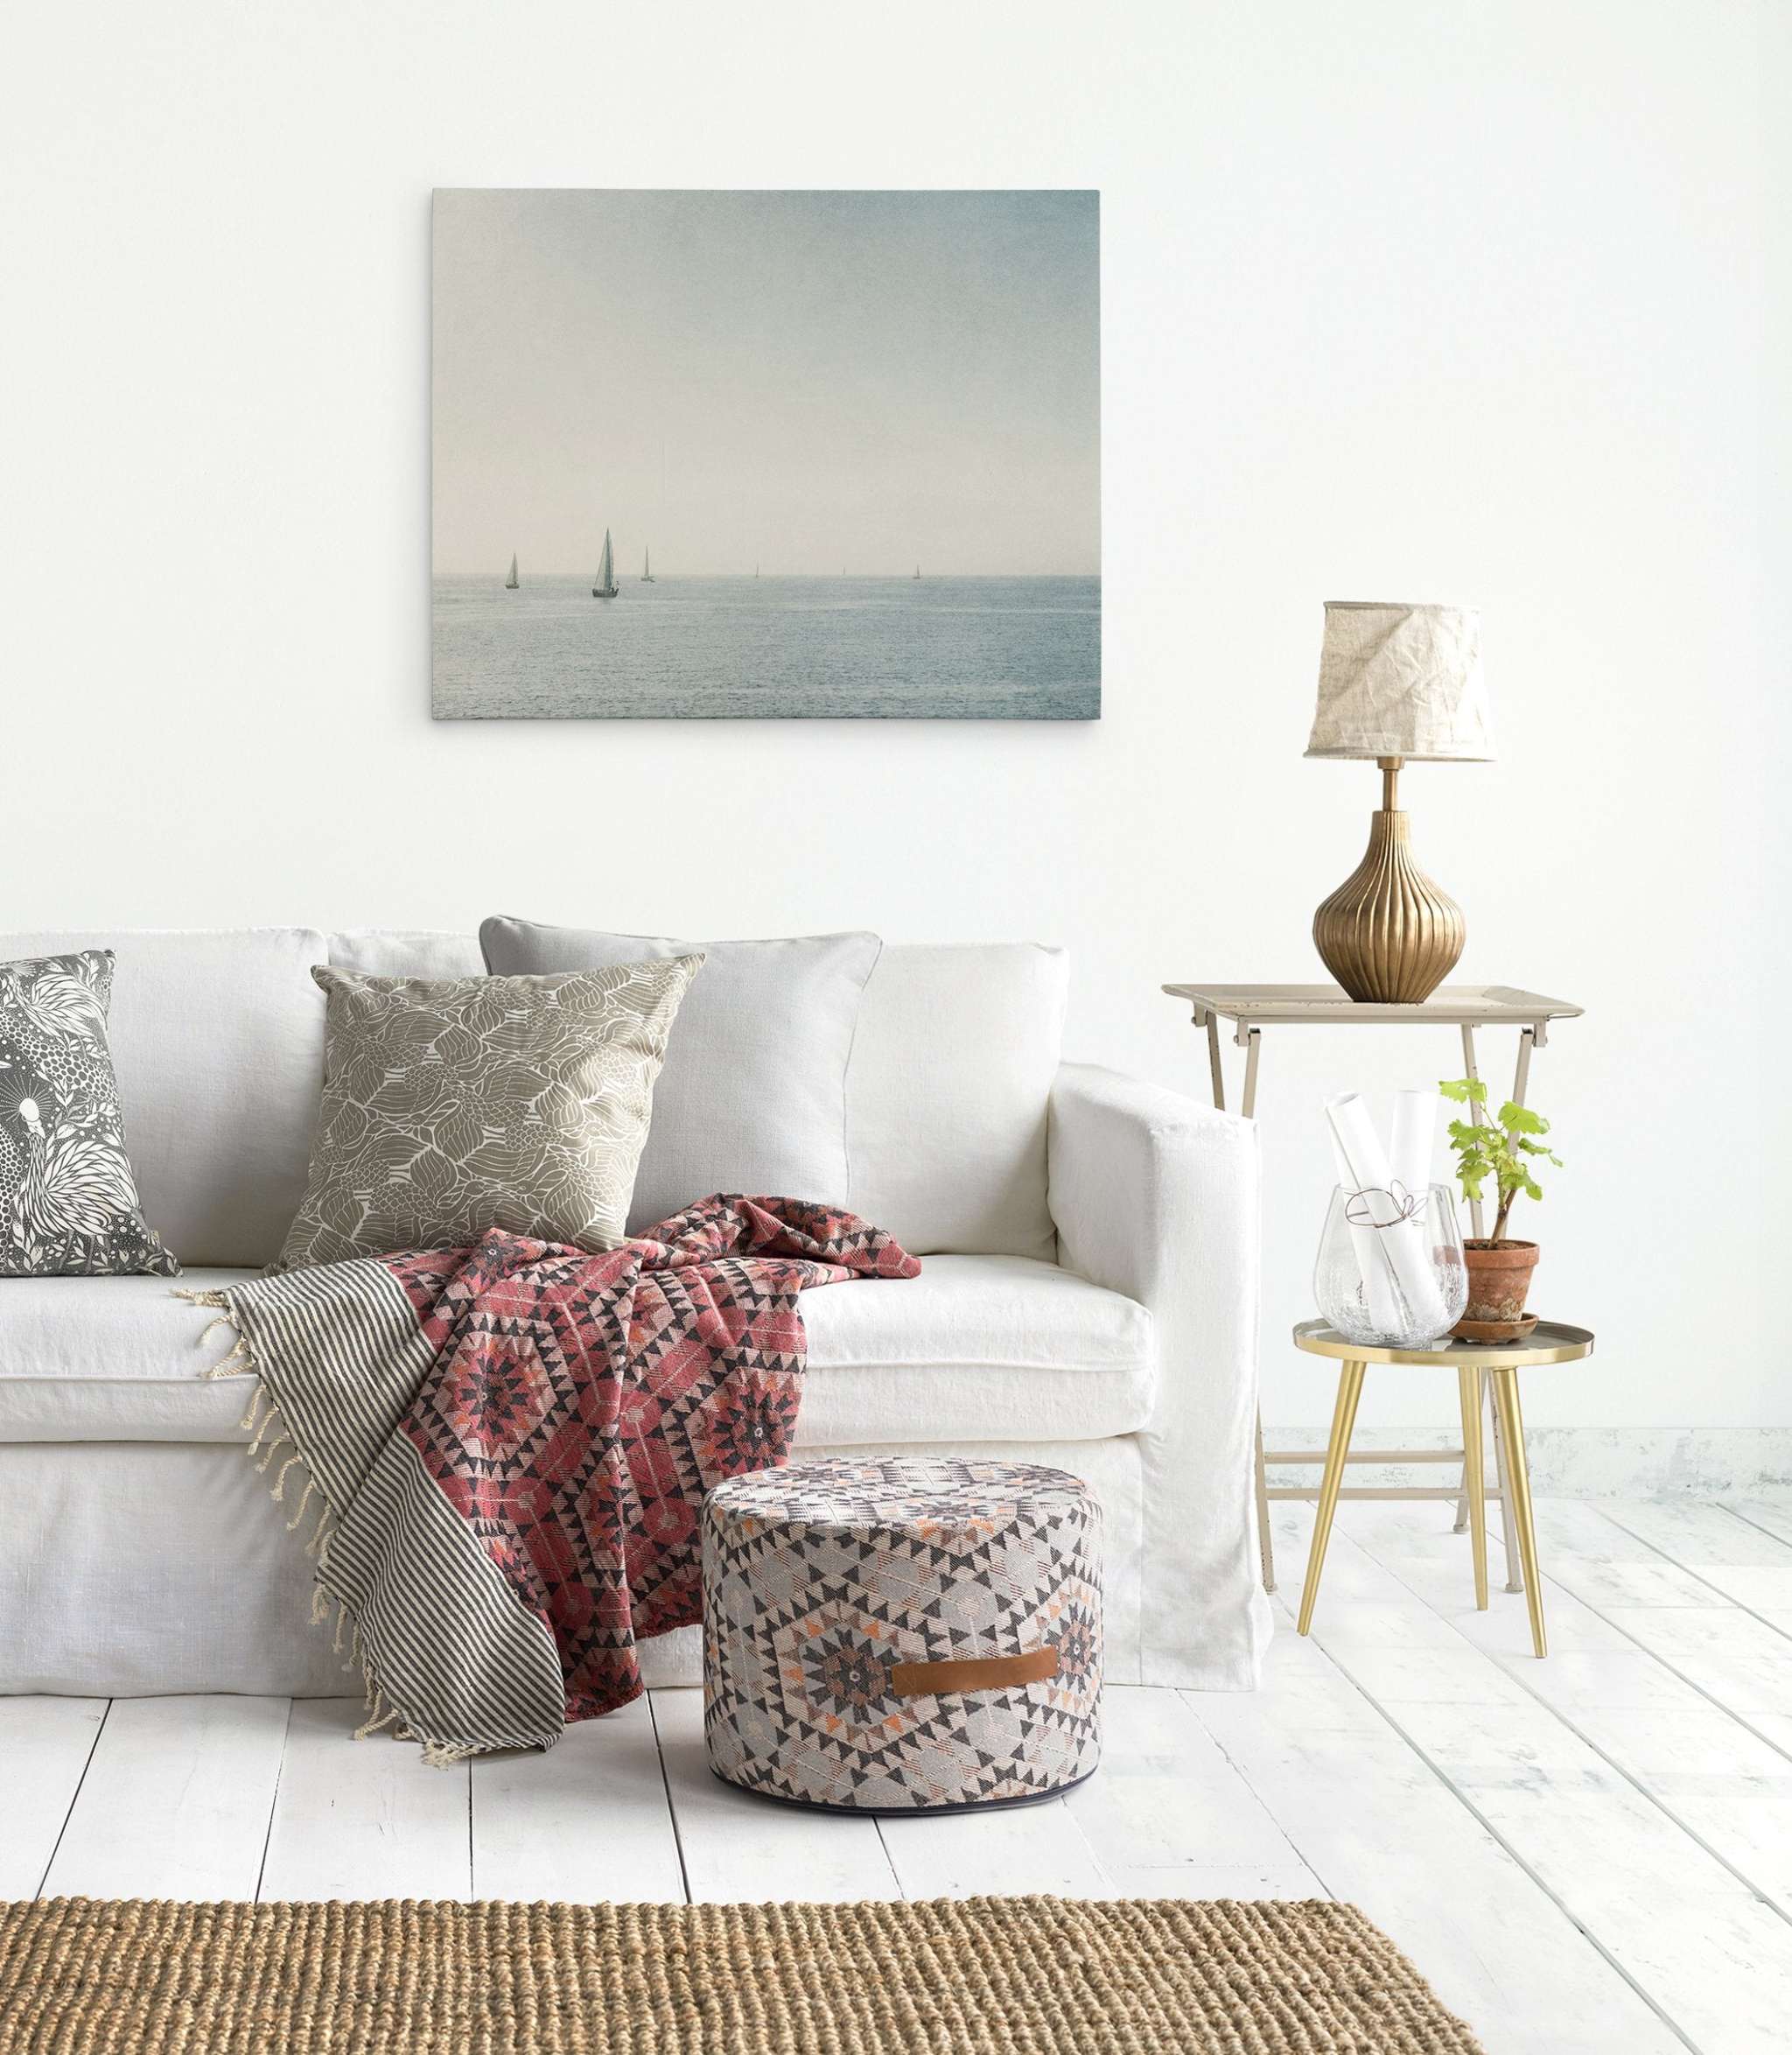 A cozy living room in Marina Del Rey features a white sofa adorned with patterned cushions and a red blanket. A pouf with geometric designs sits in front of it. A small side table holds a plant and a gold lamp, while an Offley Green Moody Nautical Seascape Canvas, 'Sail Boats Approaching' elegantly hangs on the white wall.